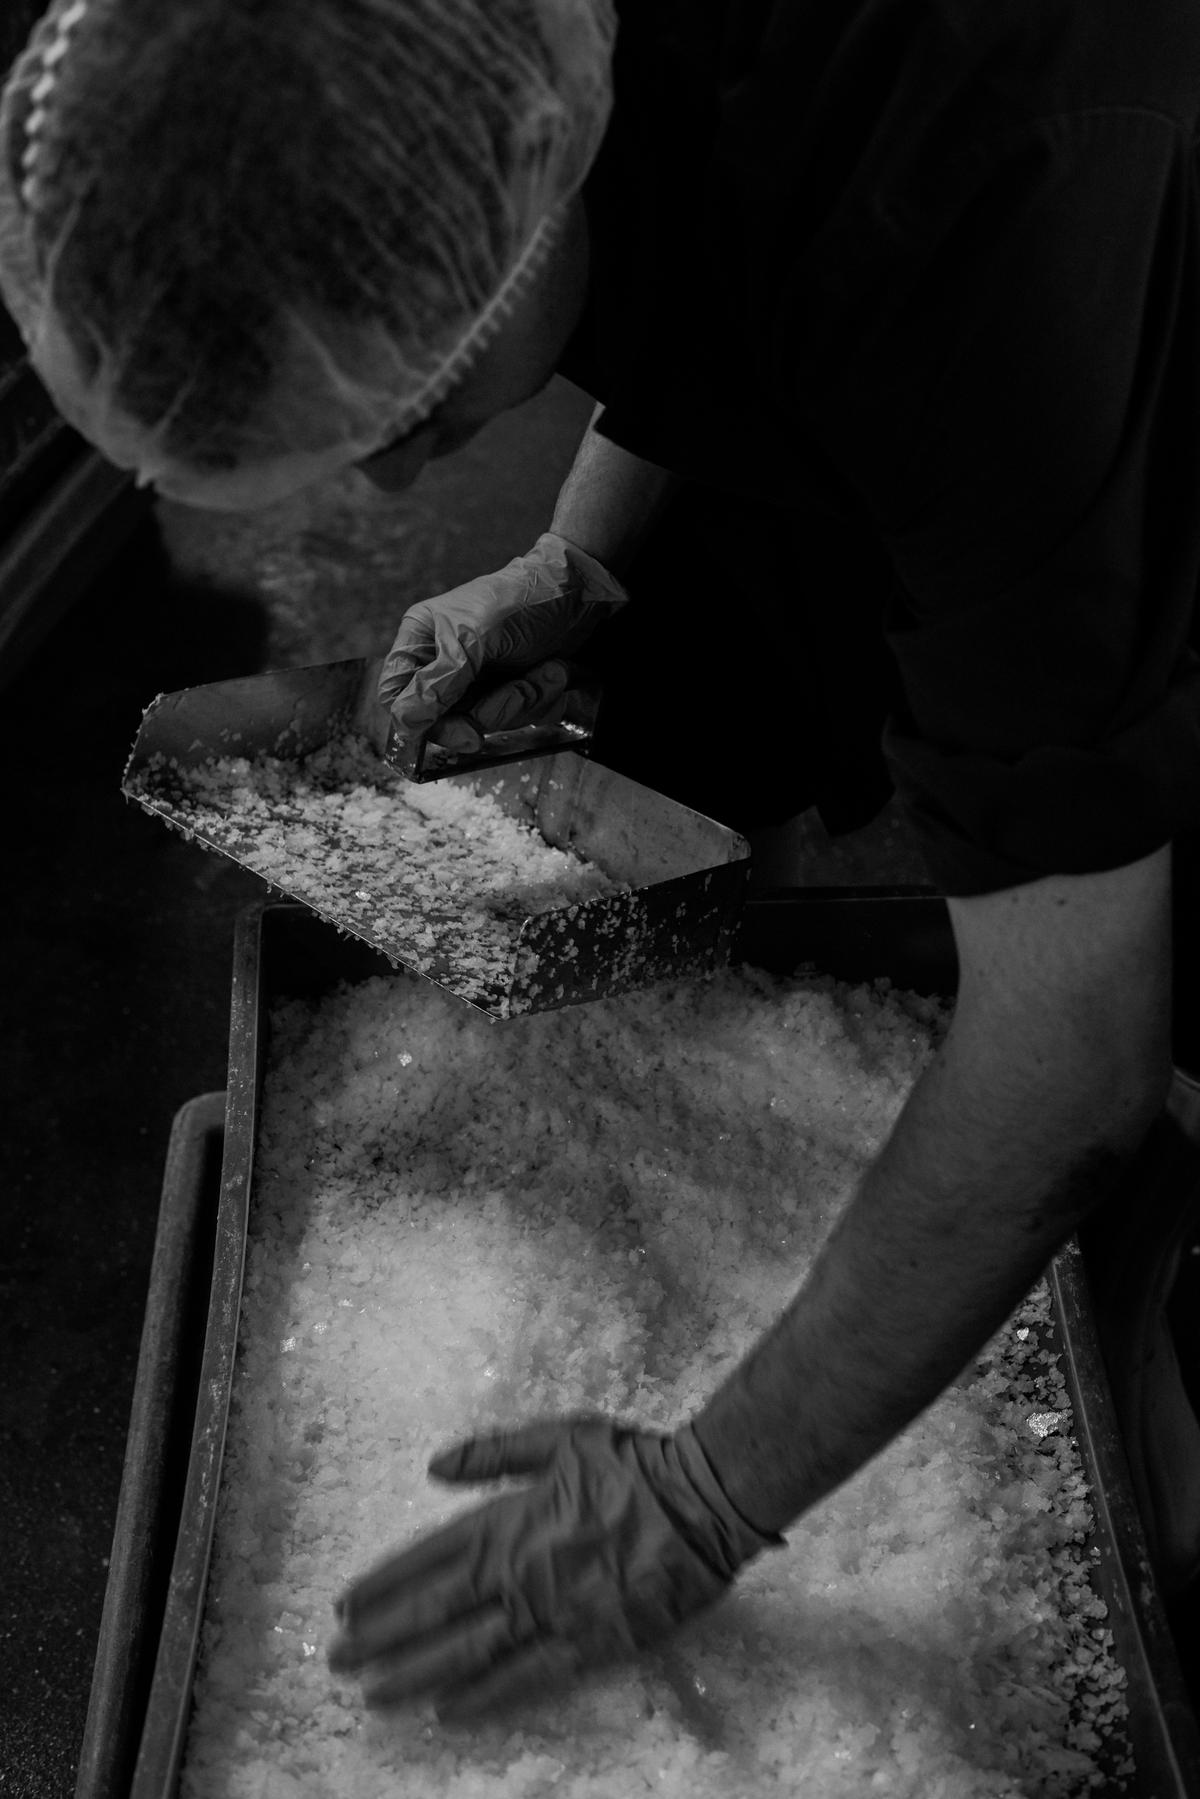 The salt is hand-harvested using traditional techniques. (Haarala Hamilton/Courtesy of Halen Mon)